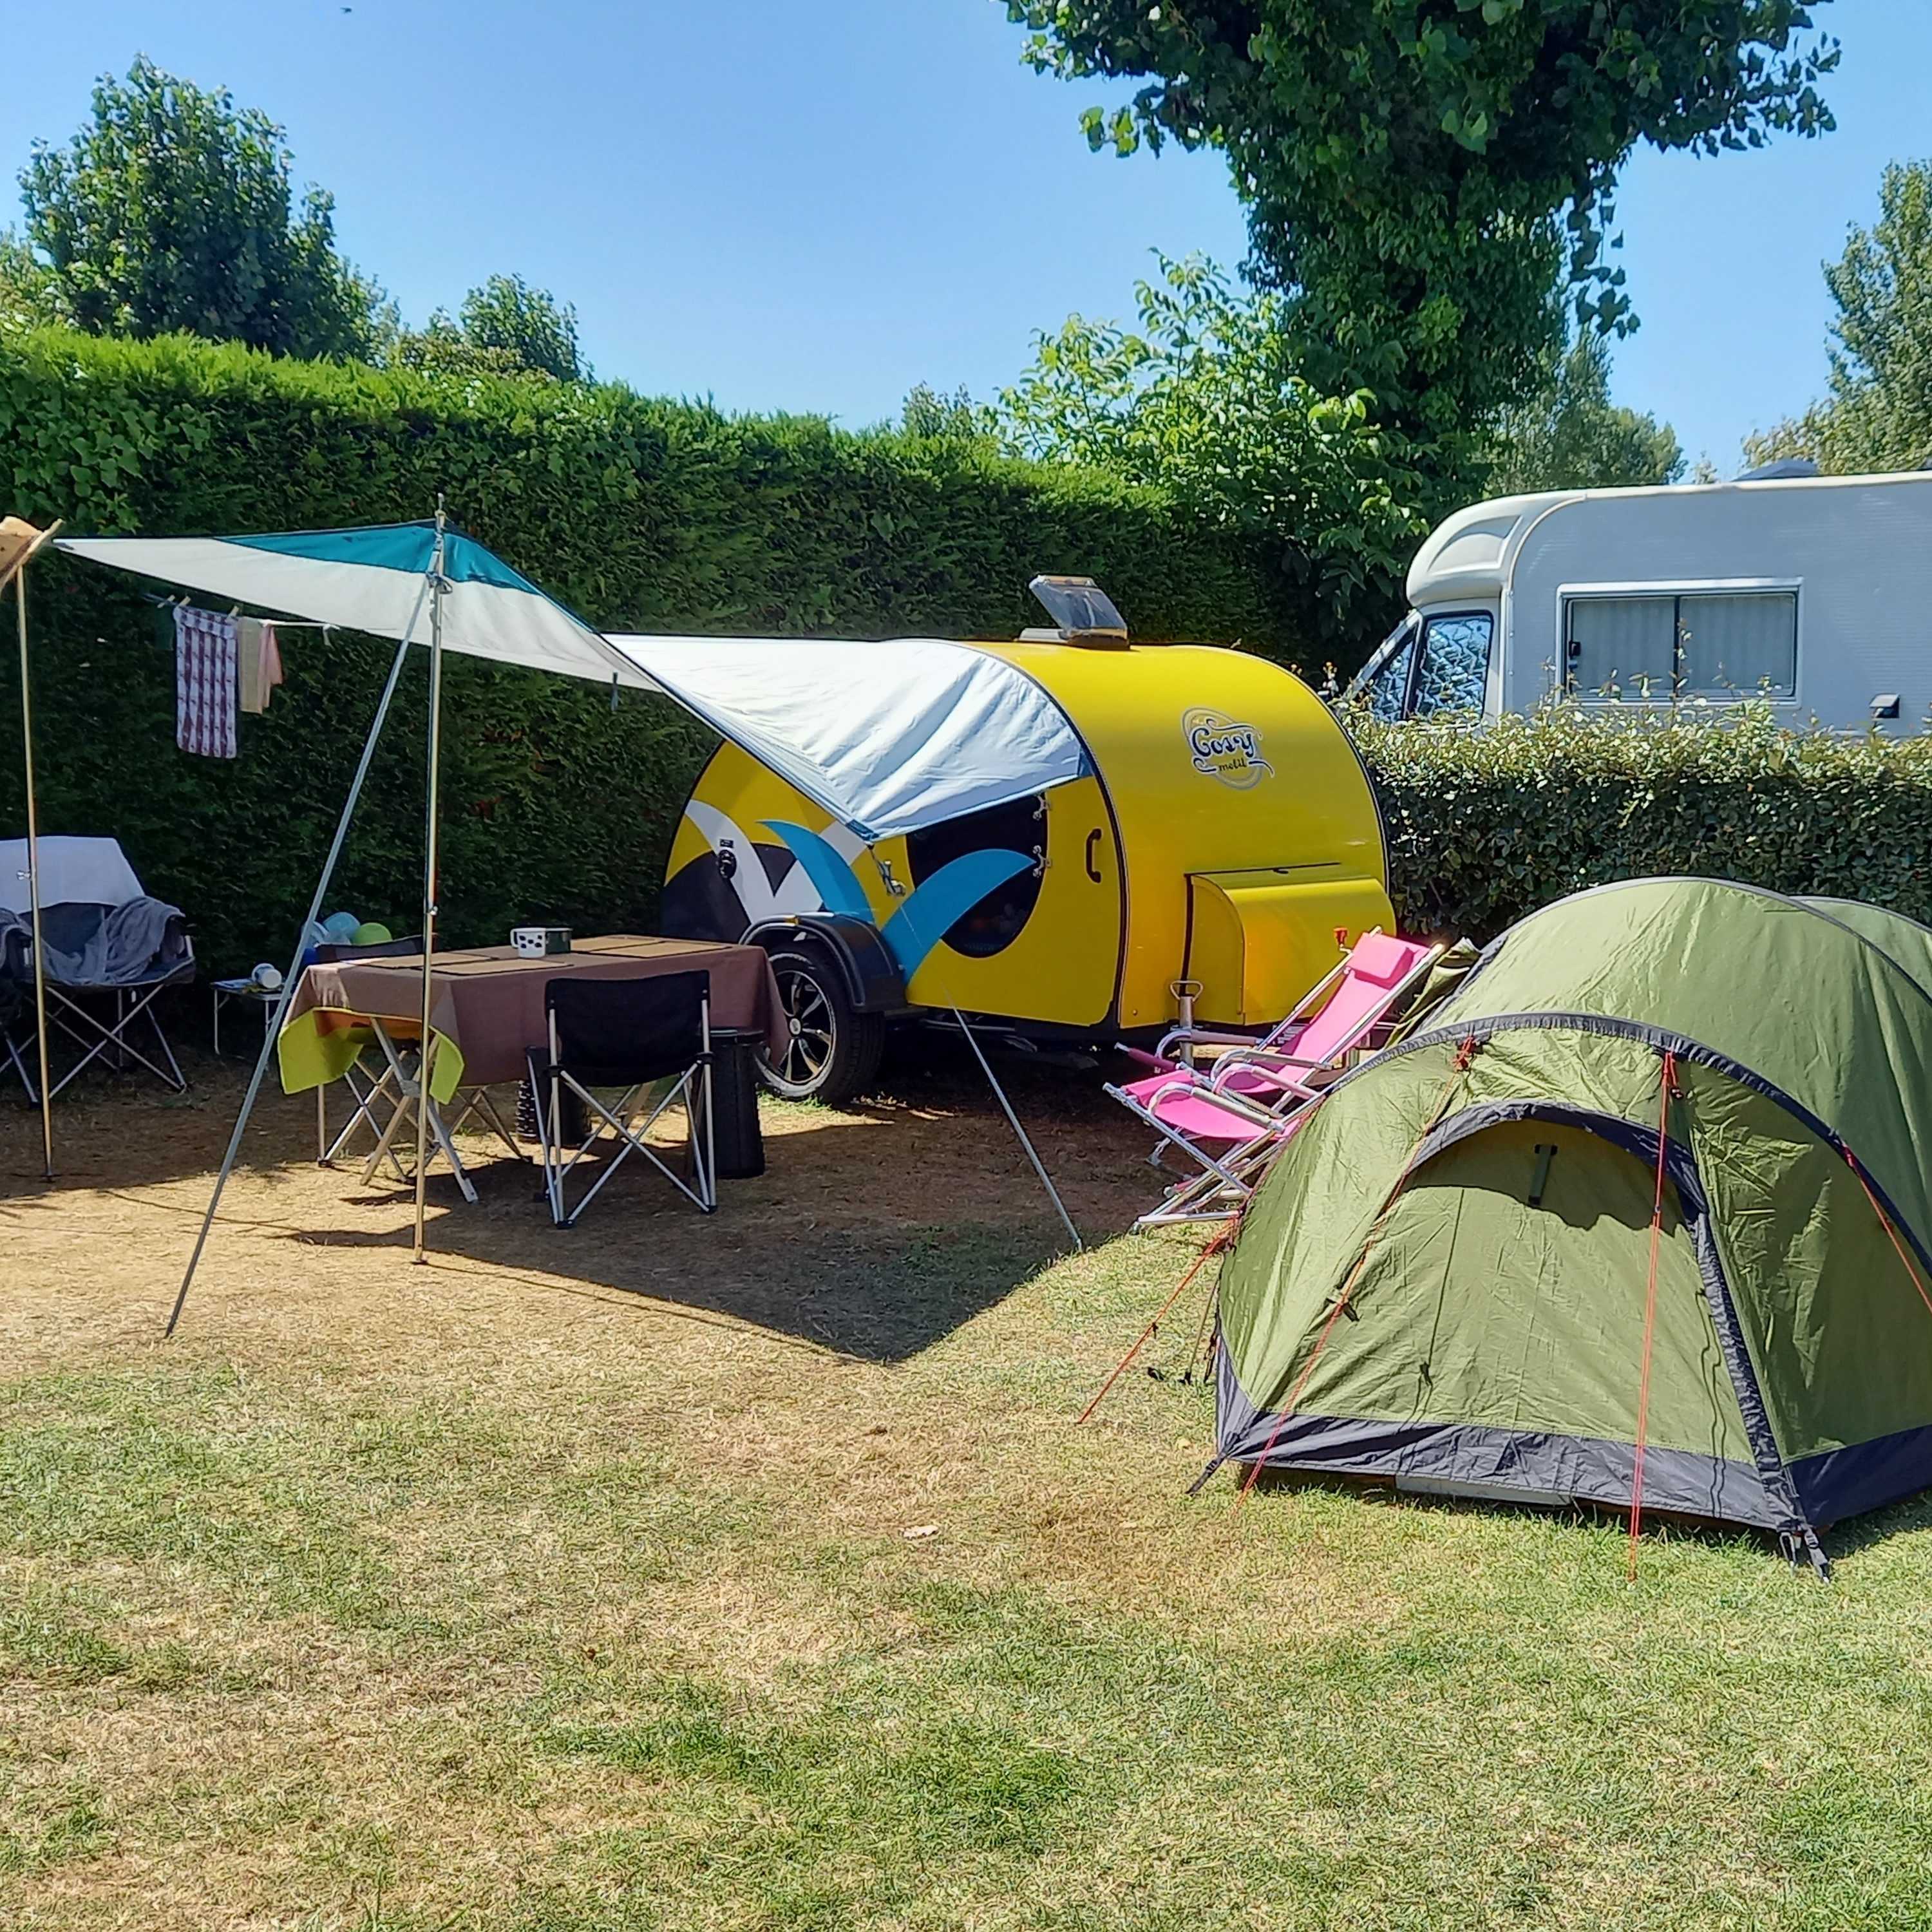 Pitch caravan – 7.50 m  (water, electricity, drain, 2 people and 1 vehicle) 1/2 Ppl. 1/2 pers.